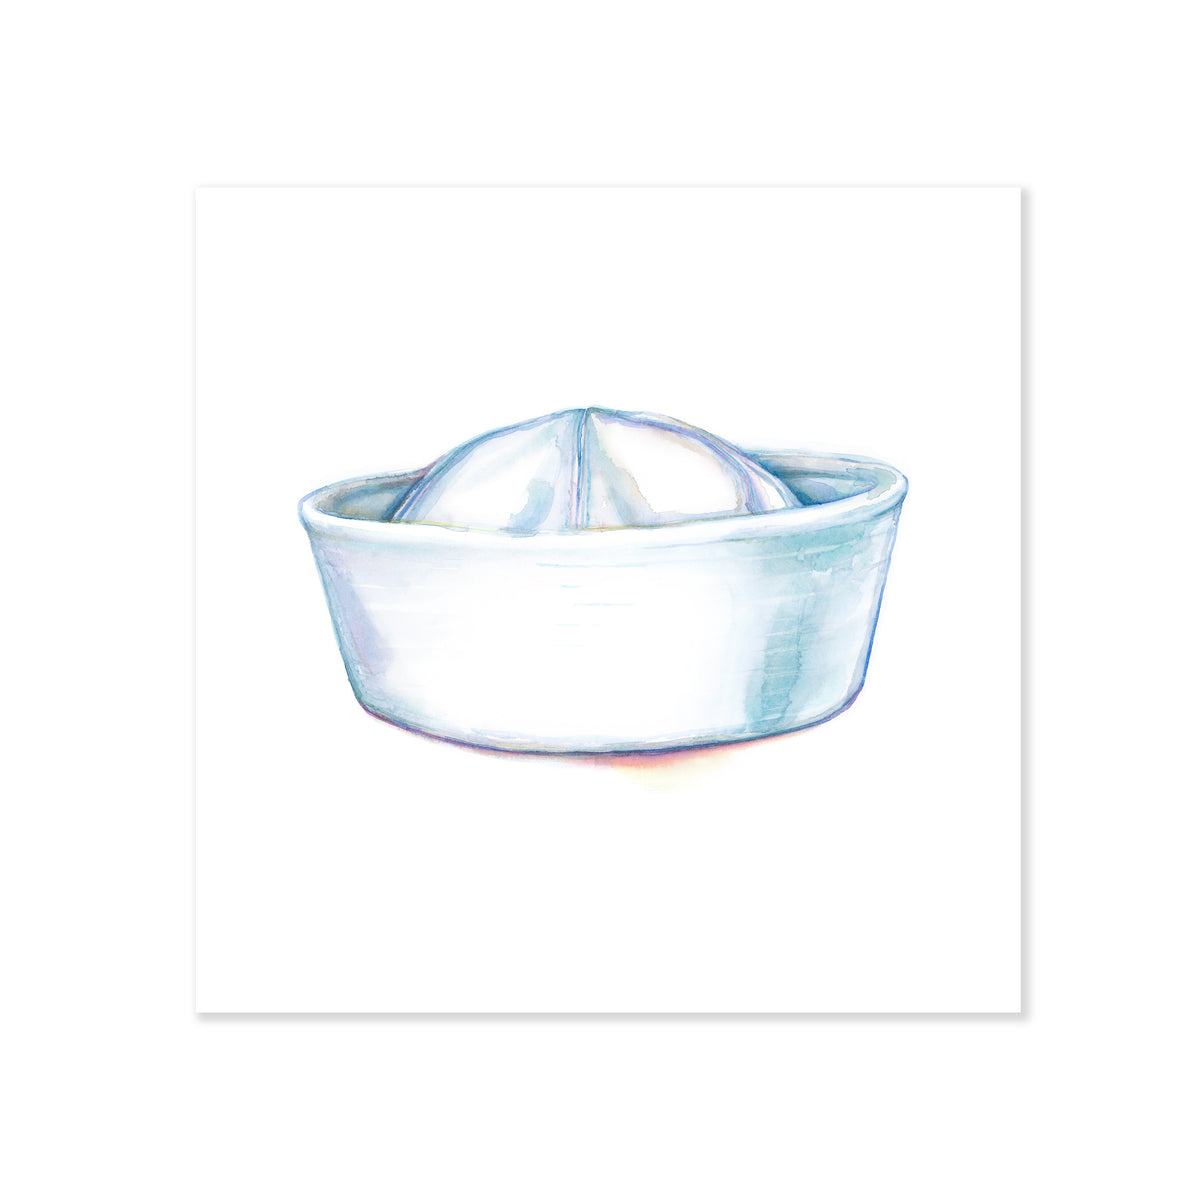 A fine art print illustrating a white vintage sailor hat painted with watercolors on a soft white background